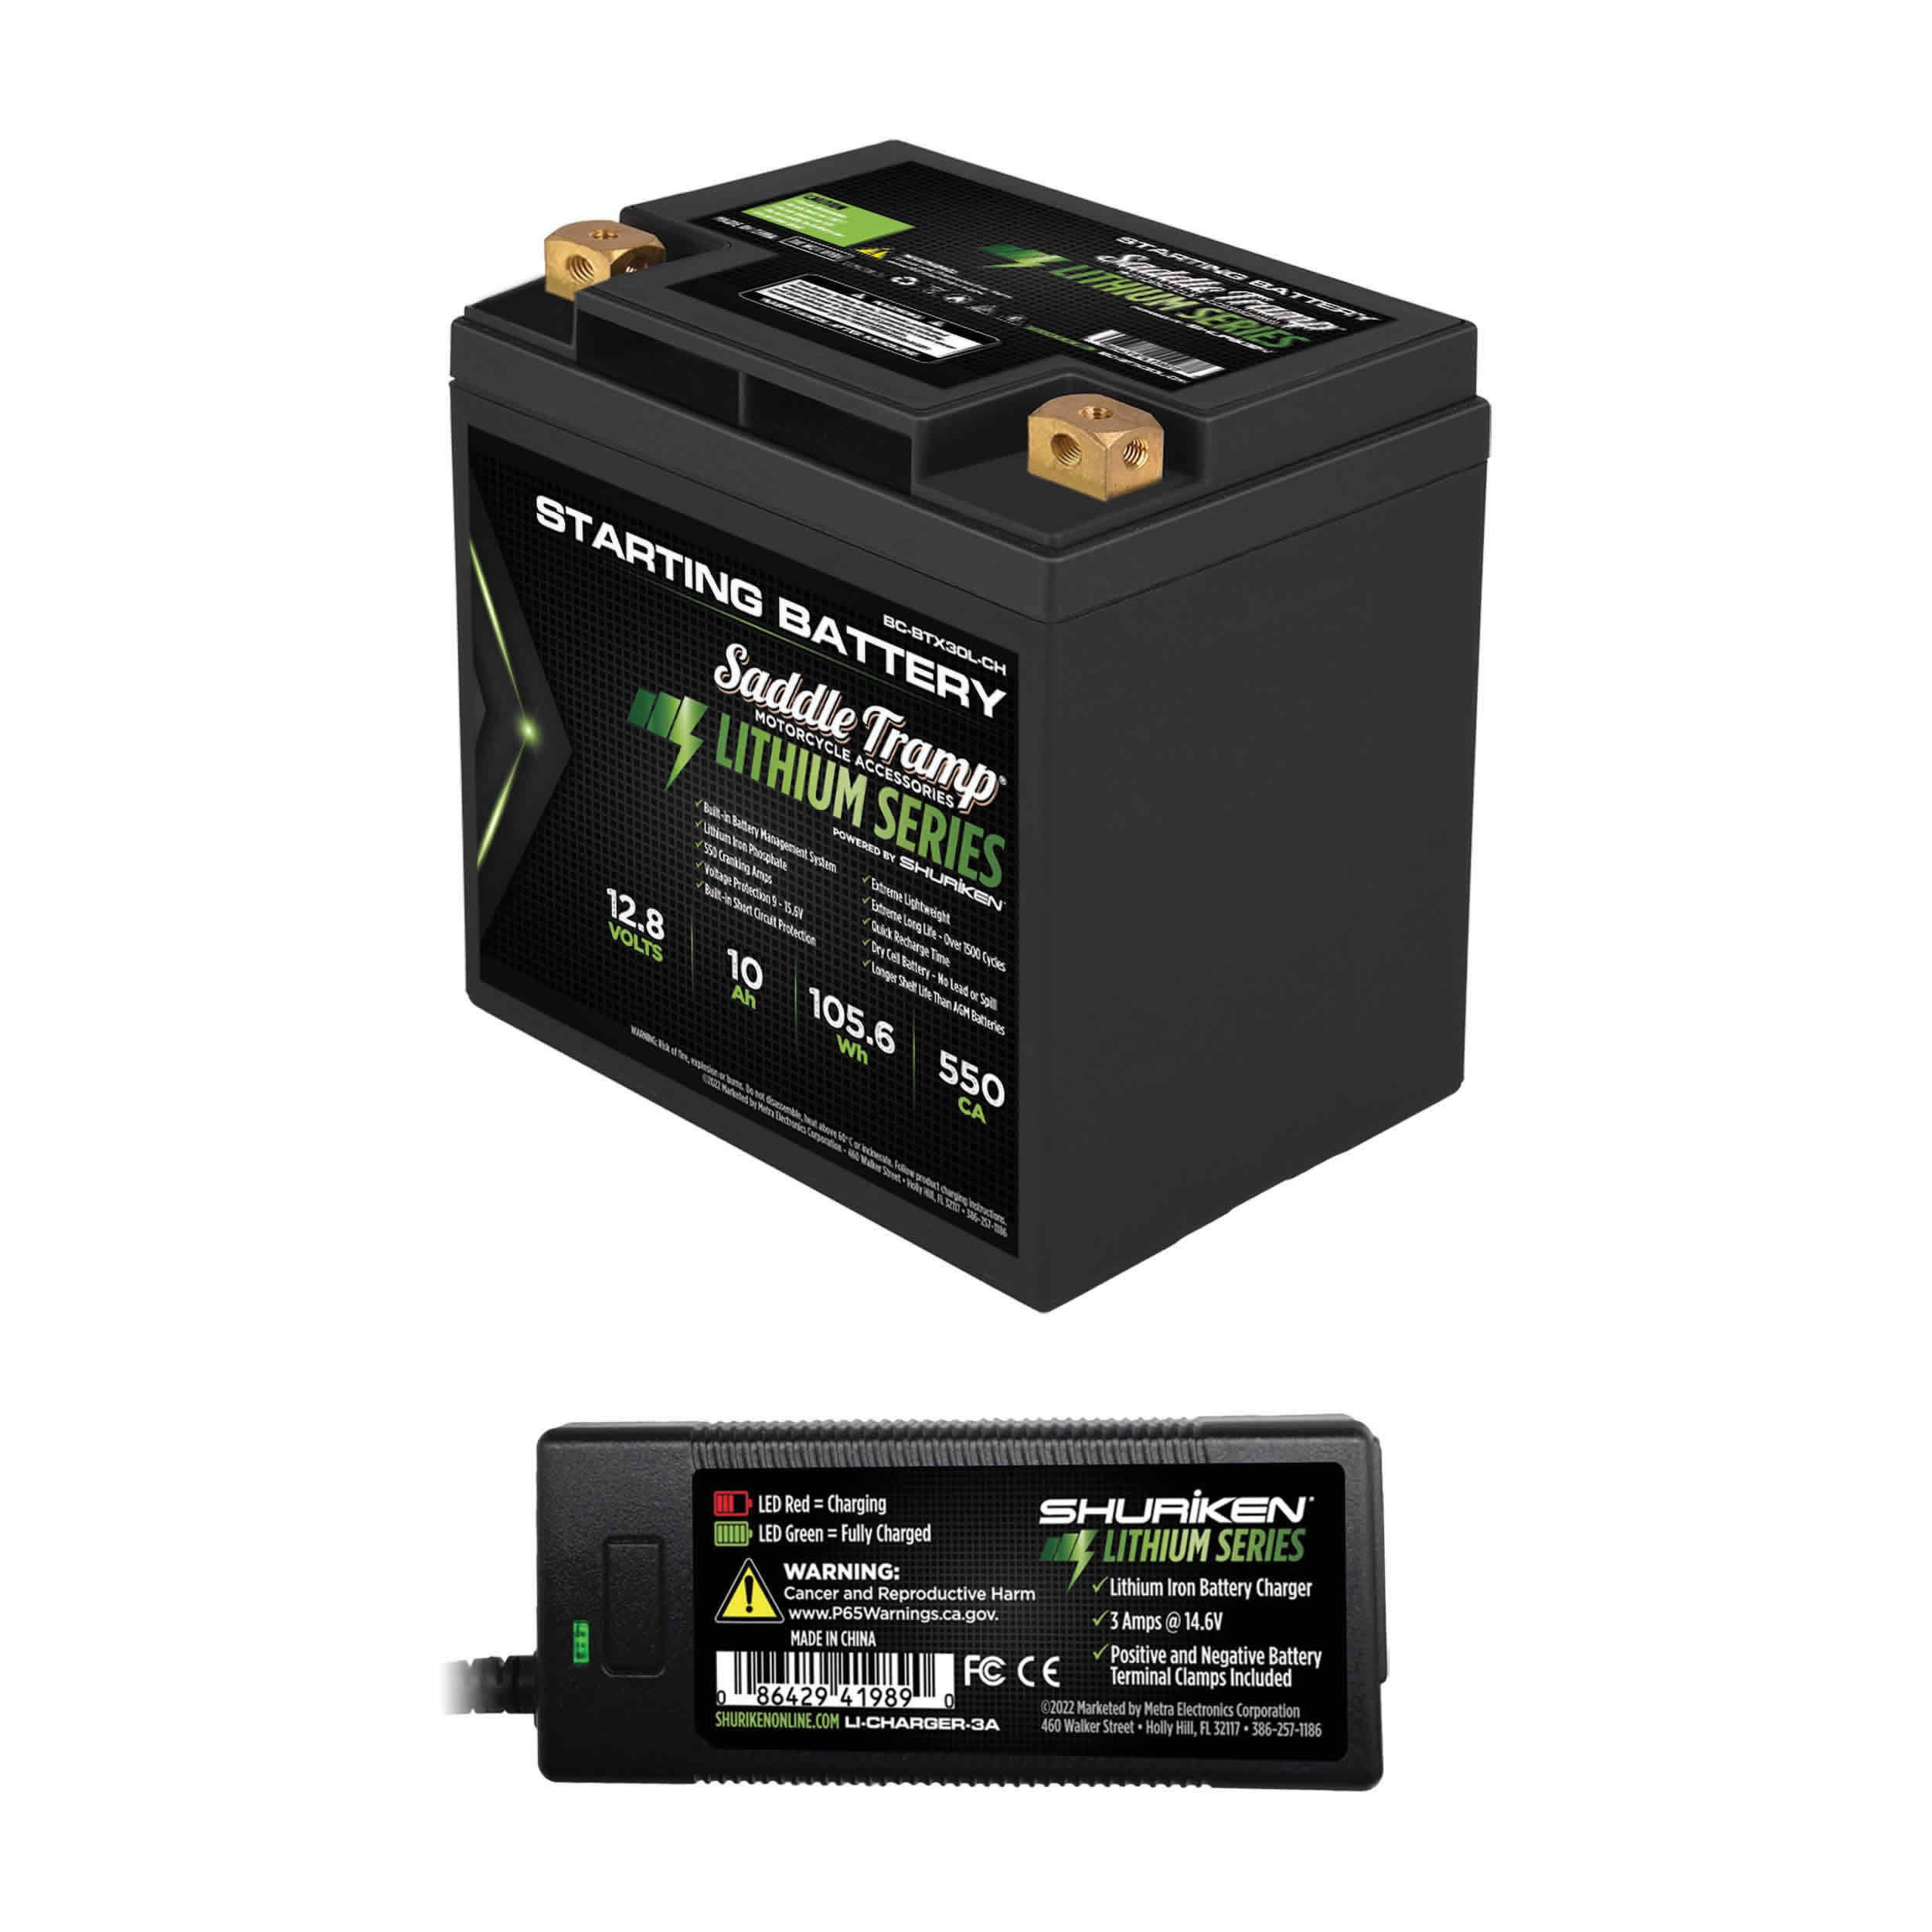 550CA/10AH Lithium-Ion Starting Battery with Charger